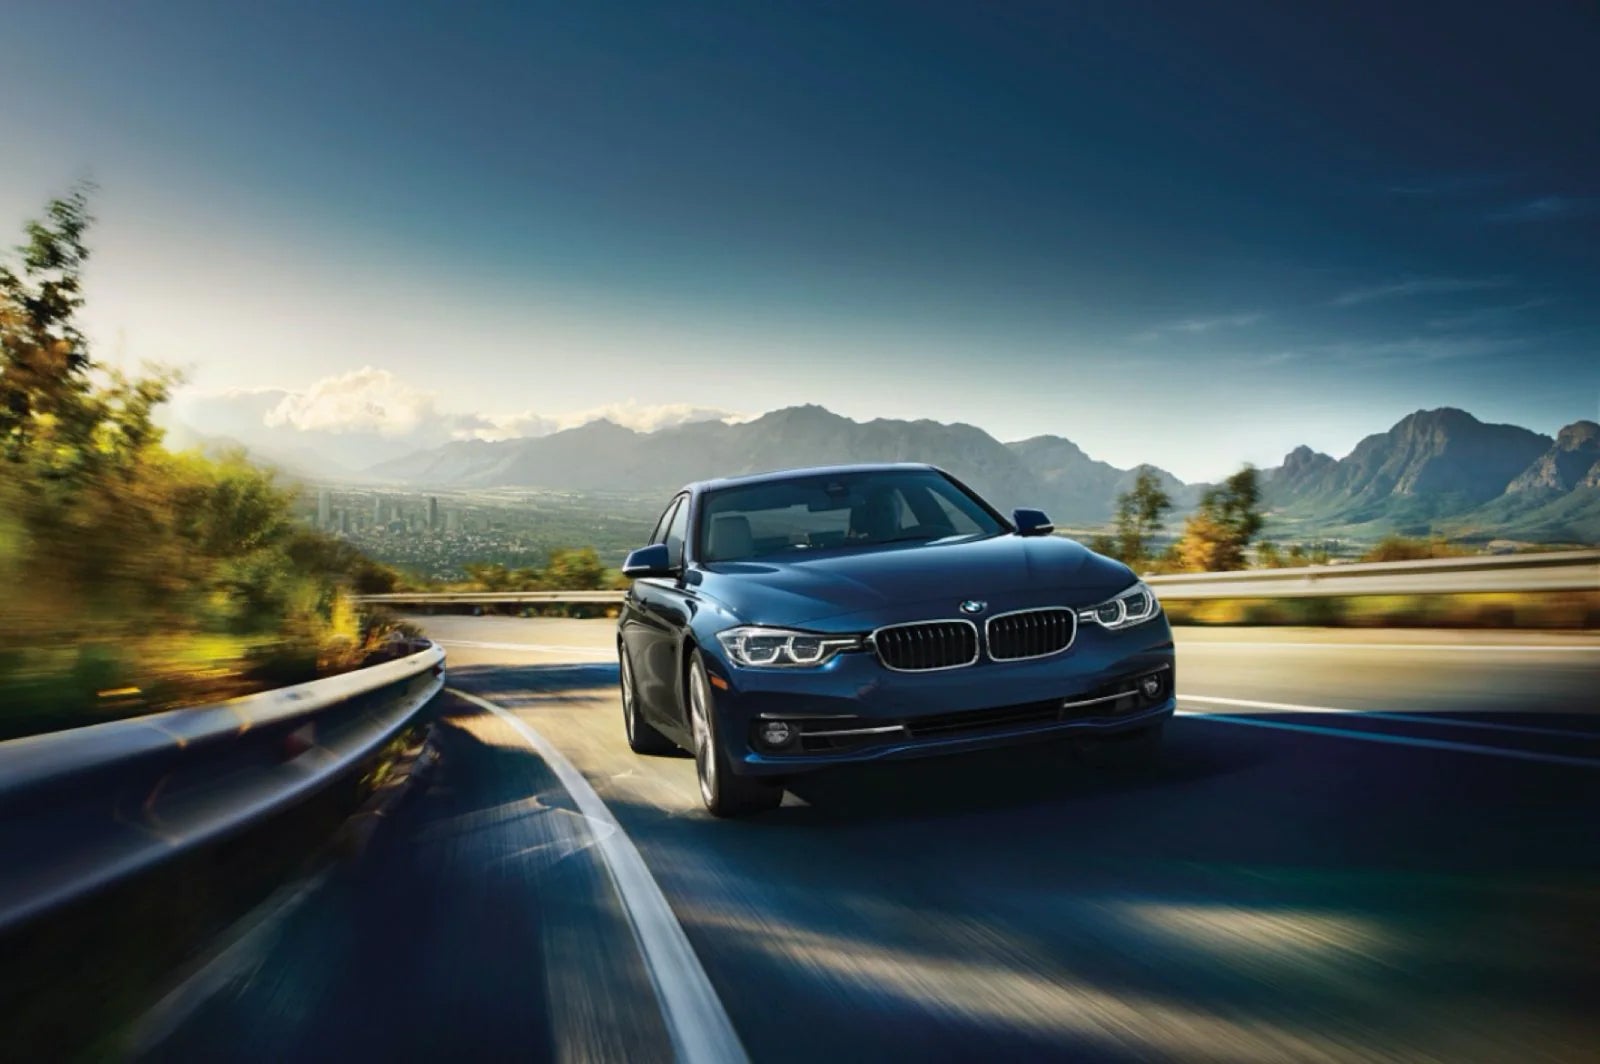 BMW 3 Series driving with mountainous backgrounds